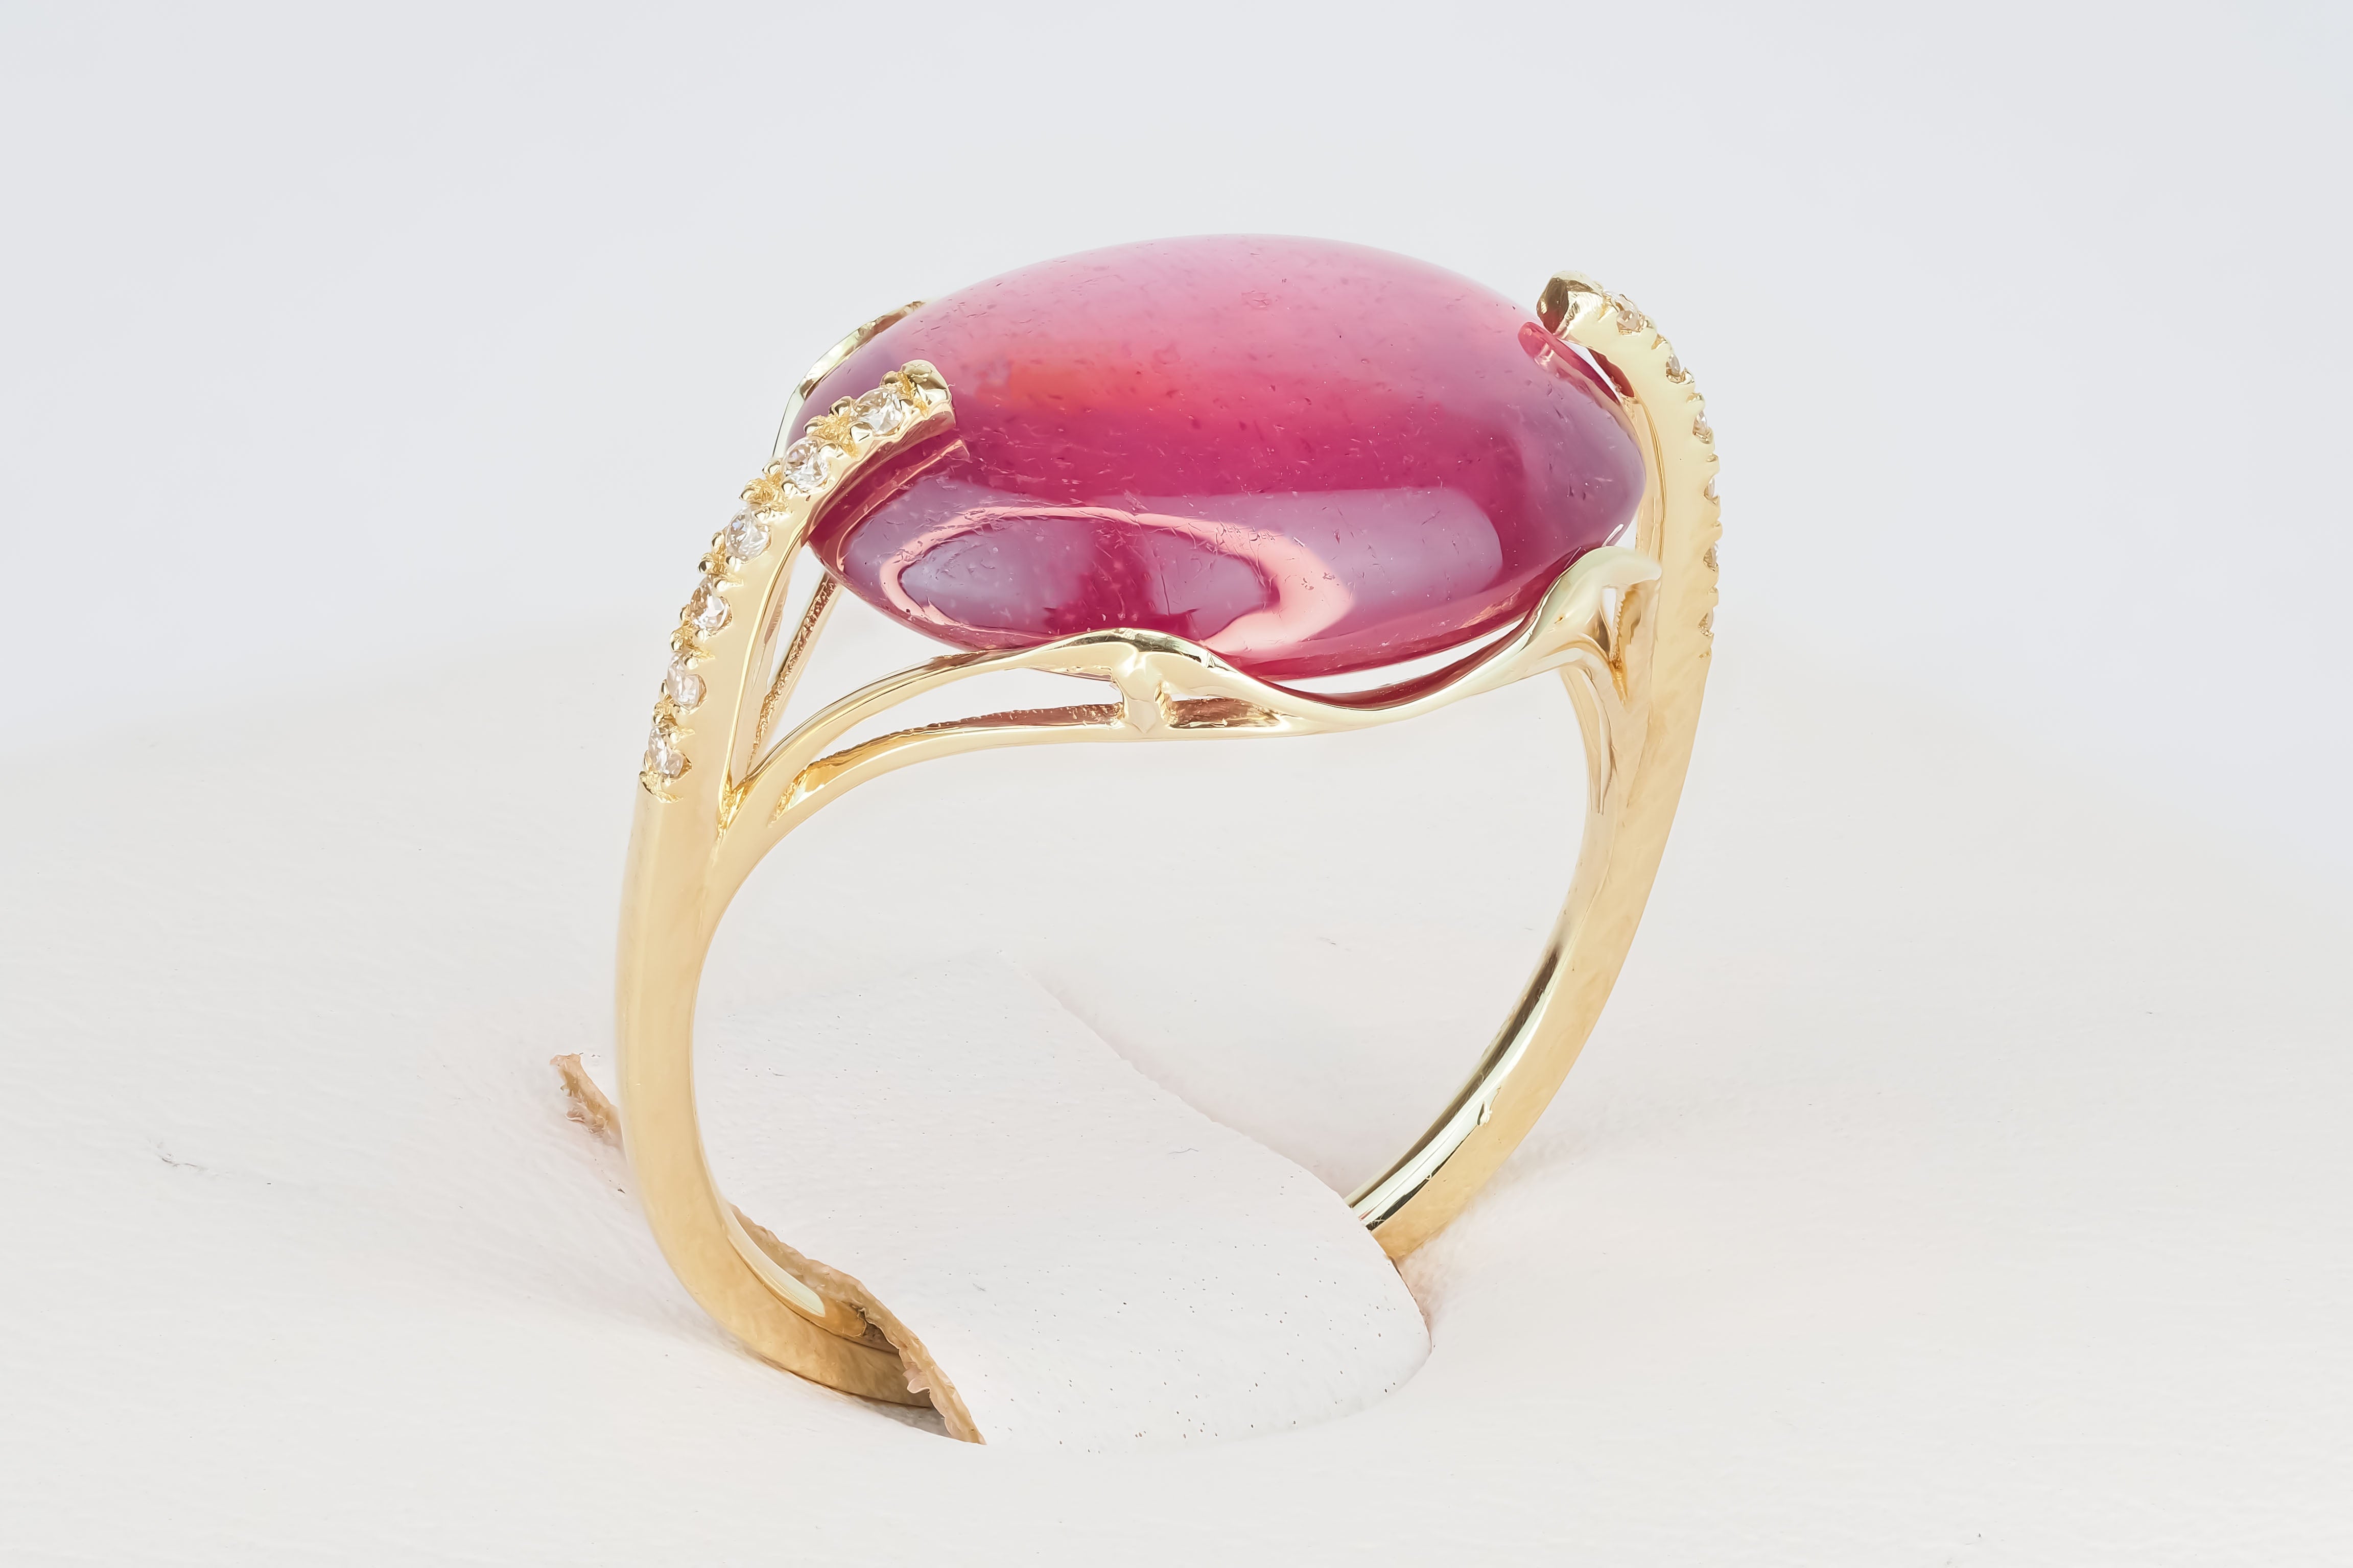 Modern 14 Karat Gold Ring with Cabochon Ruby and Diamonds. July birthstone ruby ring